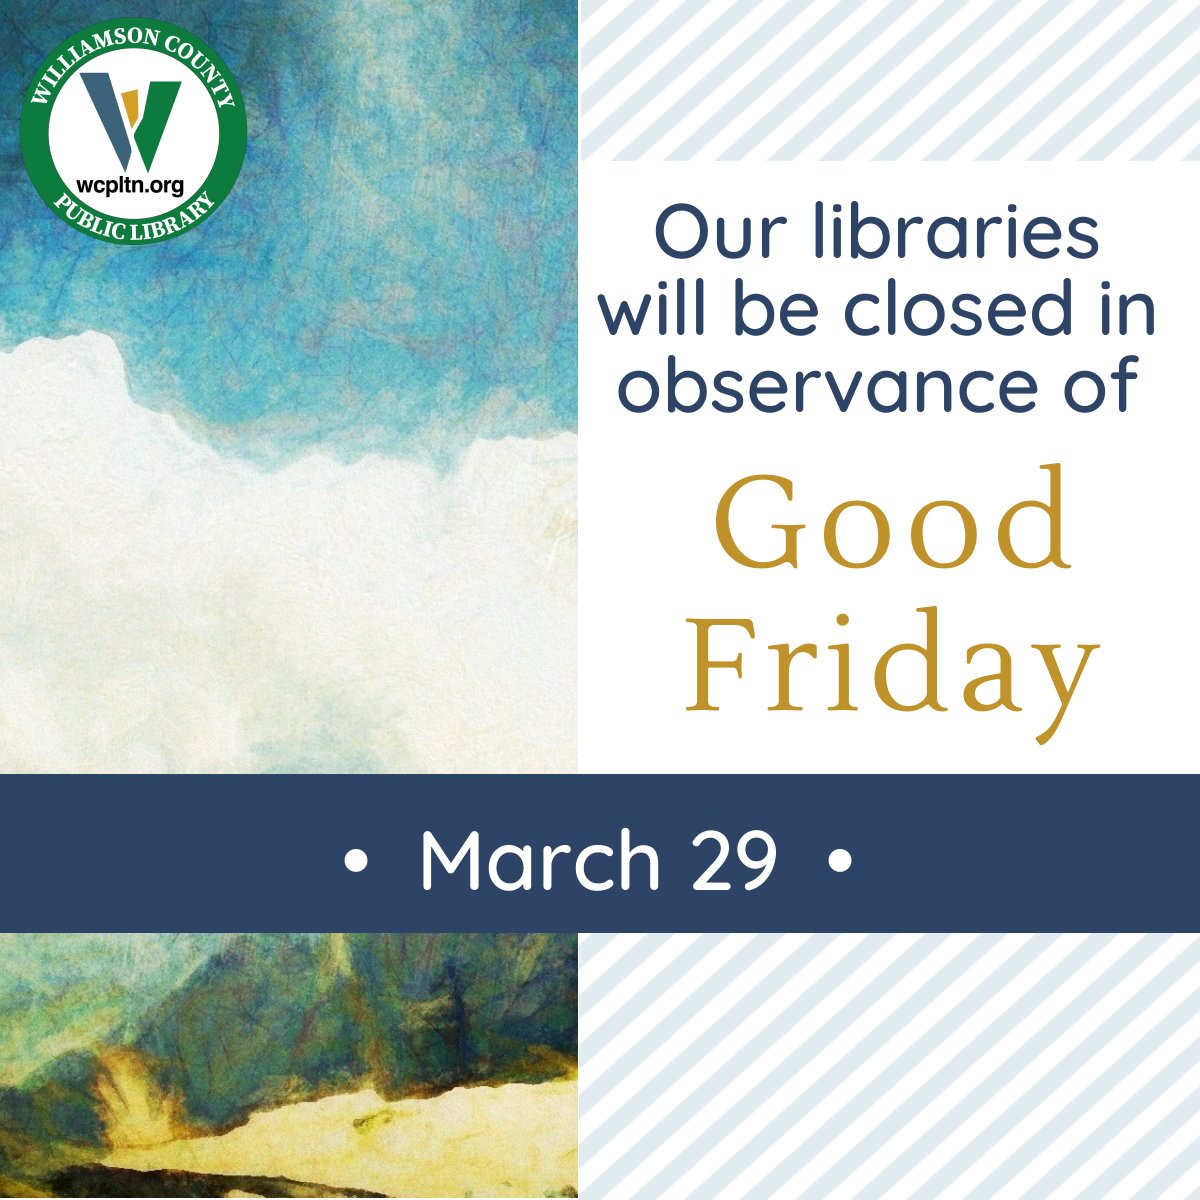 The Main Library in Franklin will also be closed on Sunday, March 31. We are always open online @ wcpltn.org